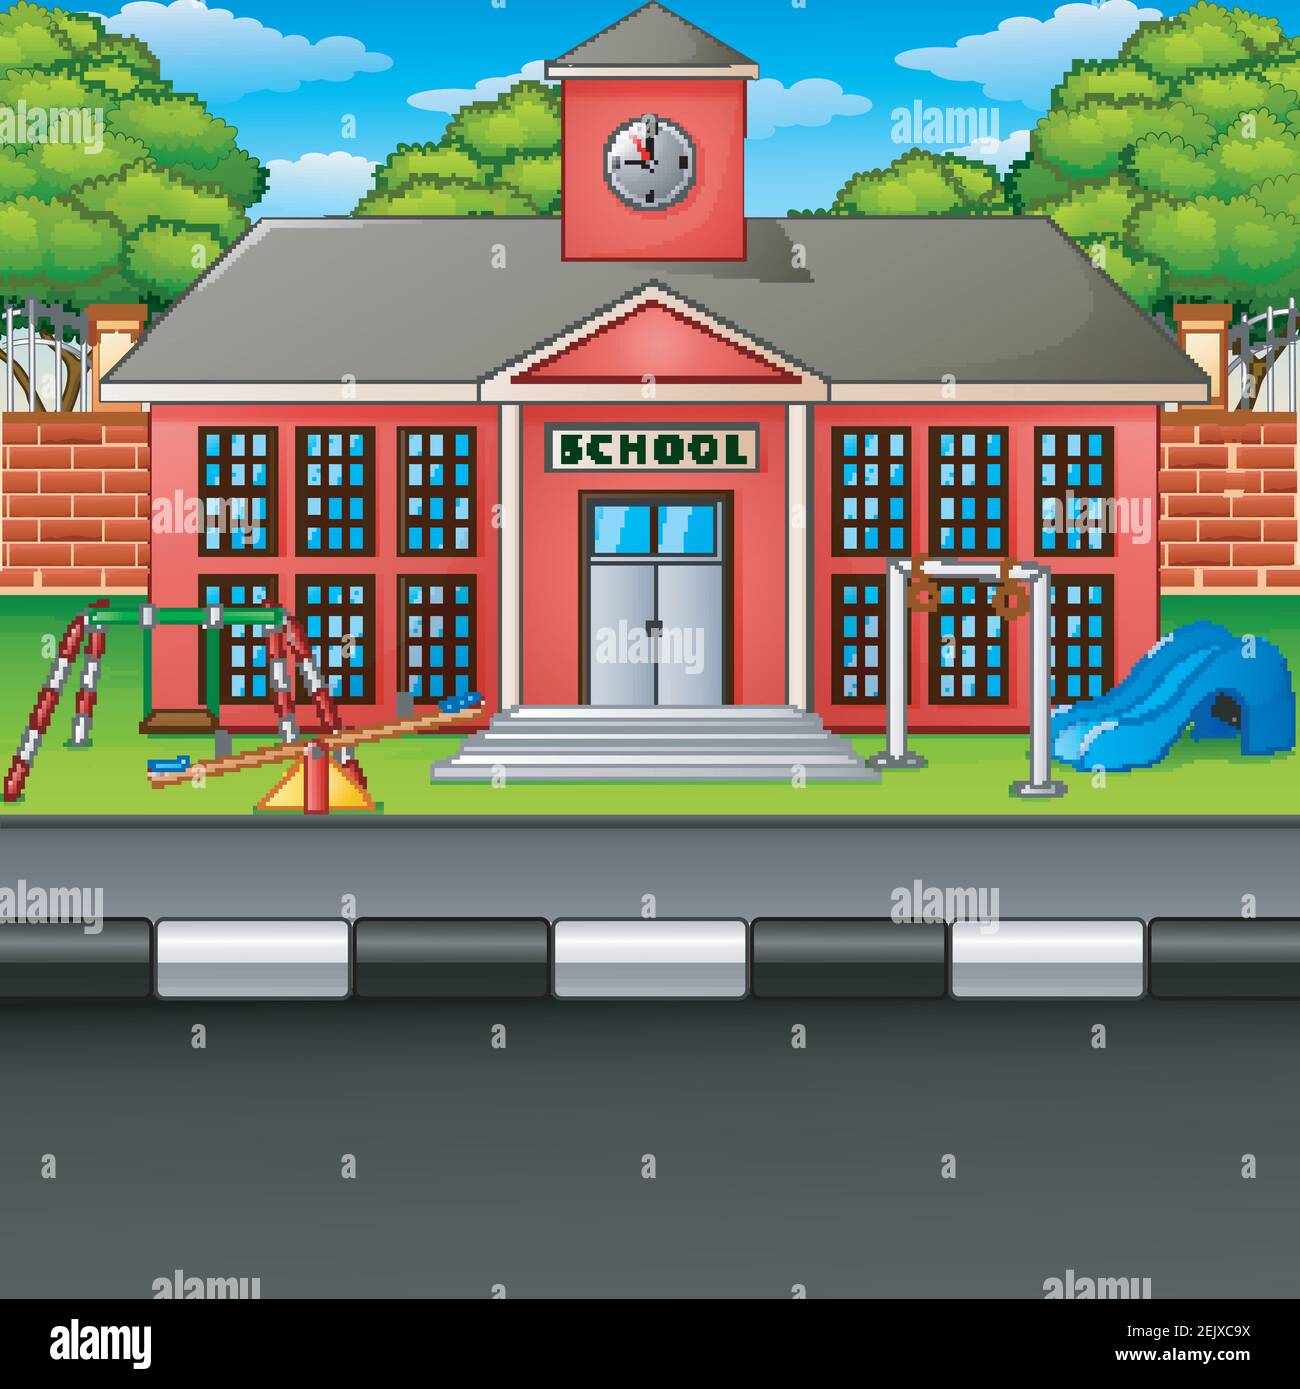 Vector Illustration Of Scene School Building And Playground Stock